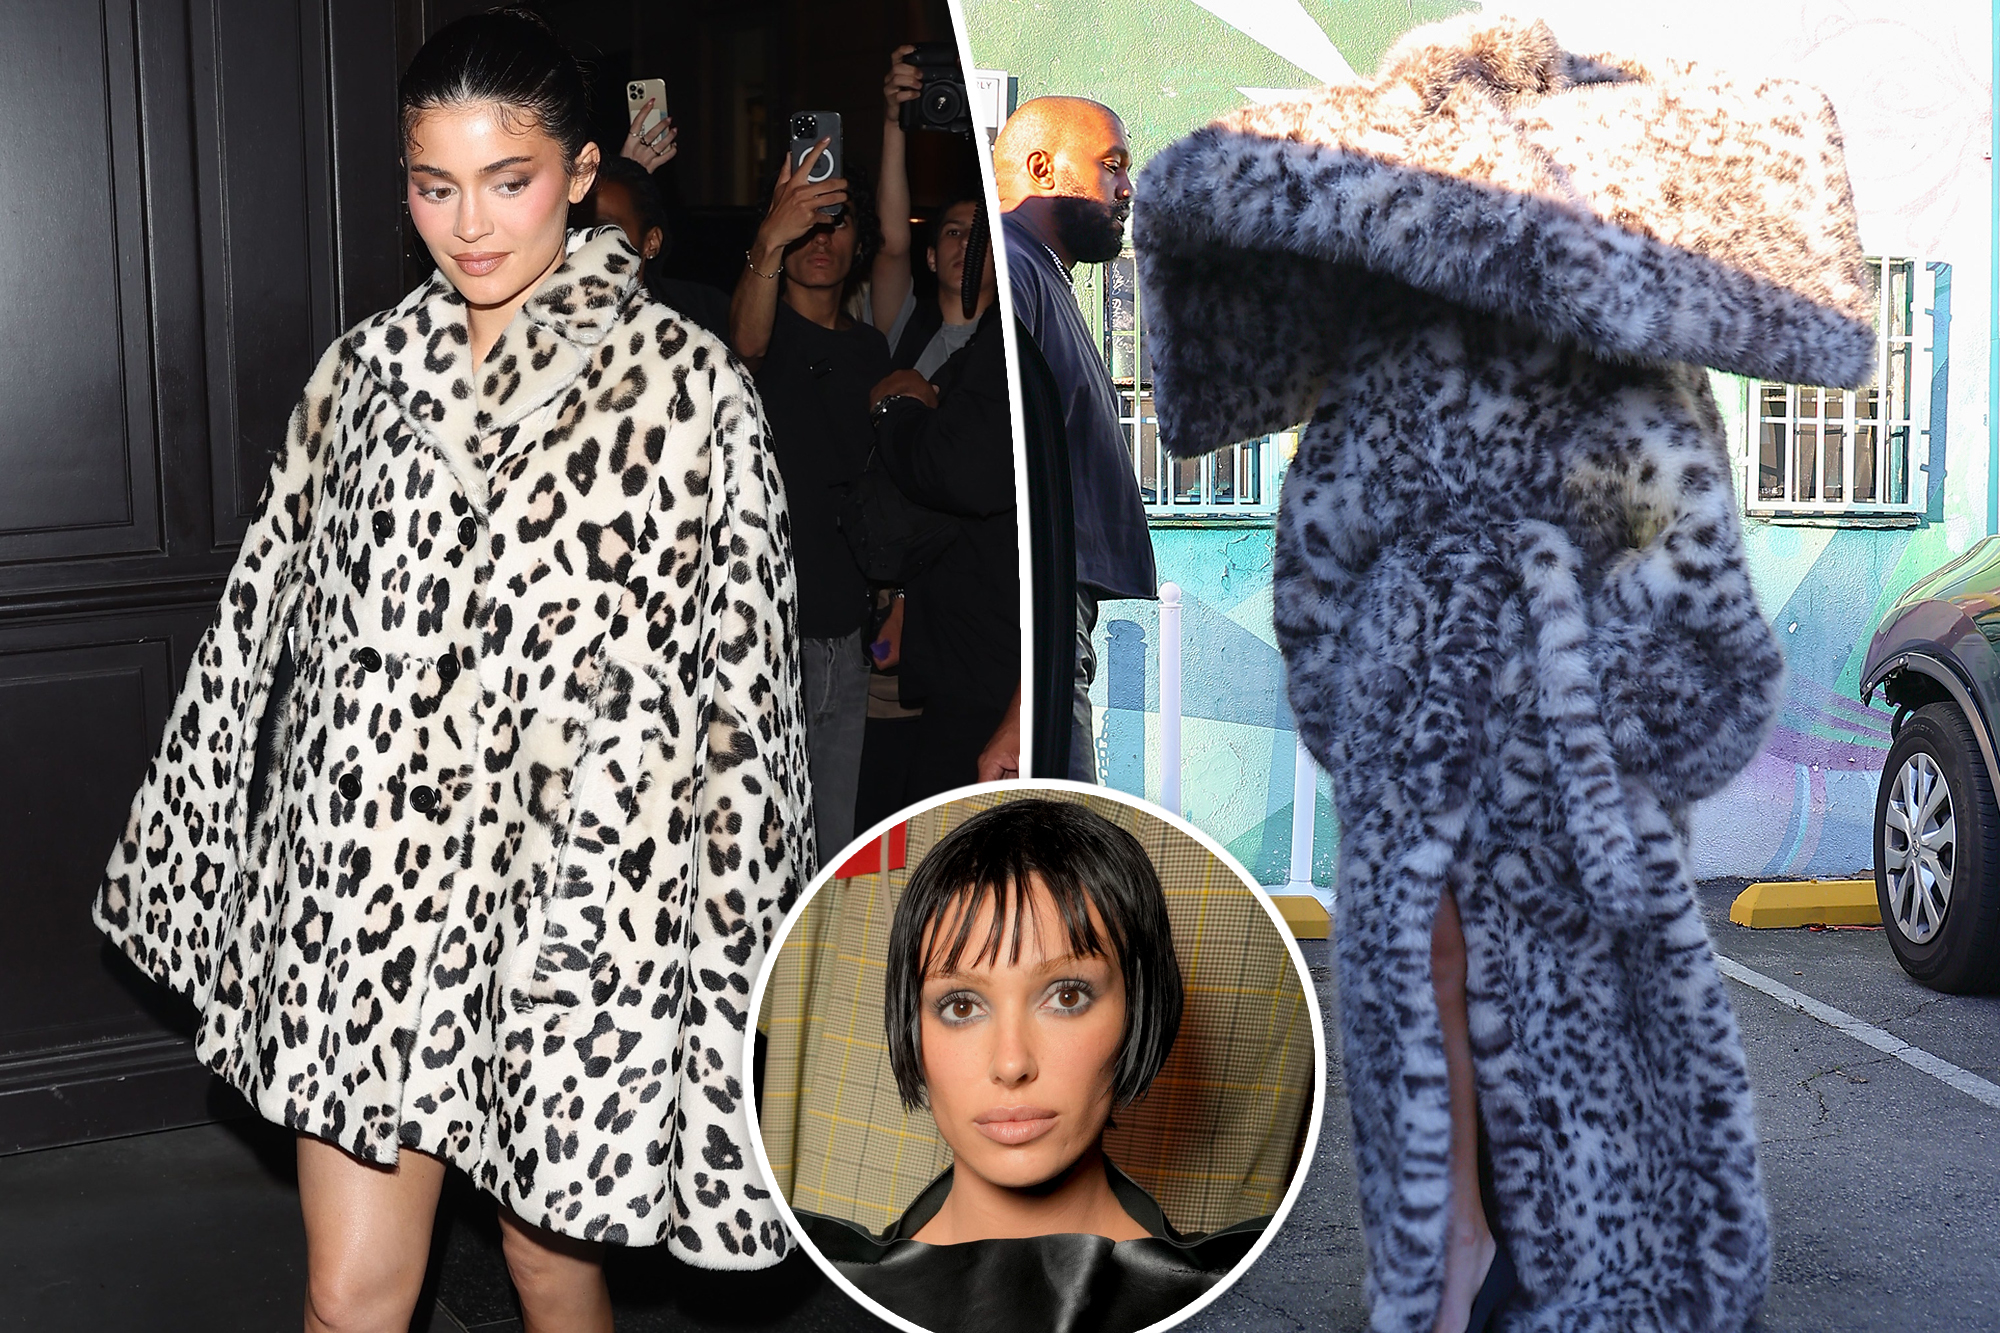 Kylie Jenner's Wild Leopard Print Look Takes Paris Fashion Week by Storm!